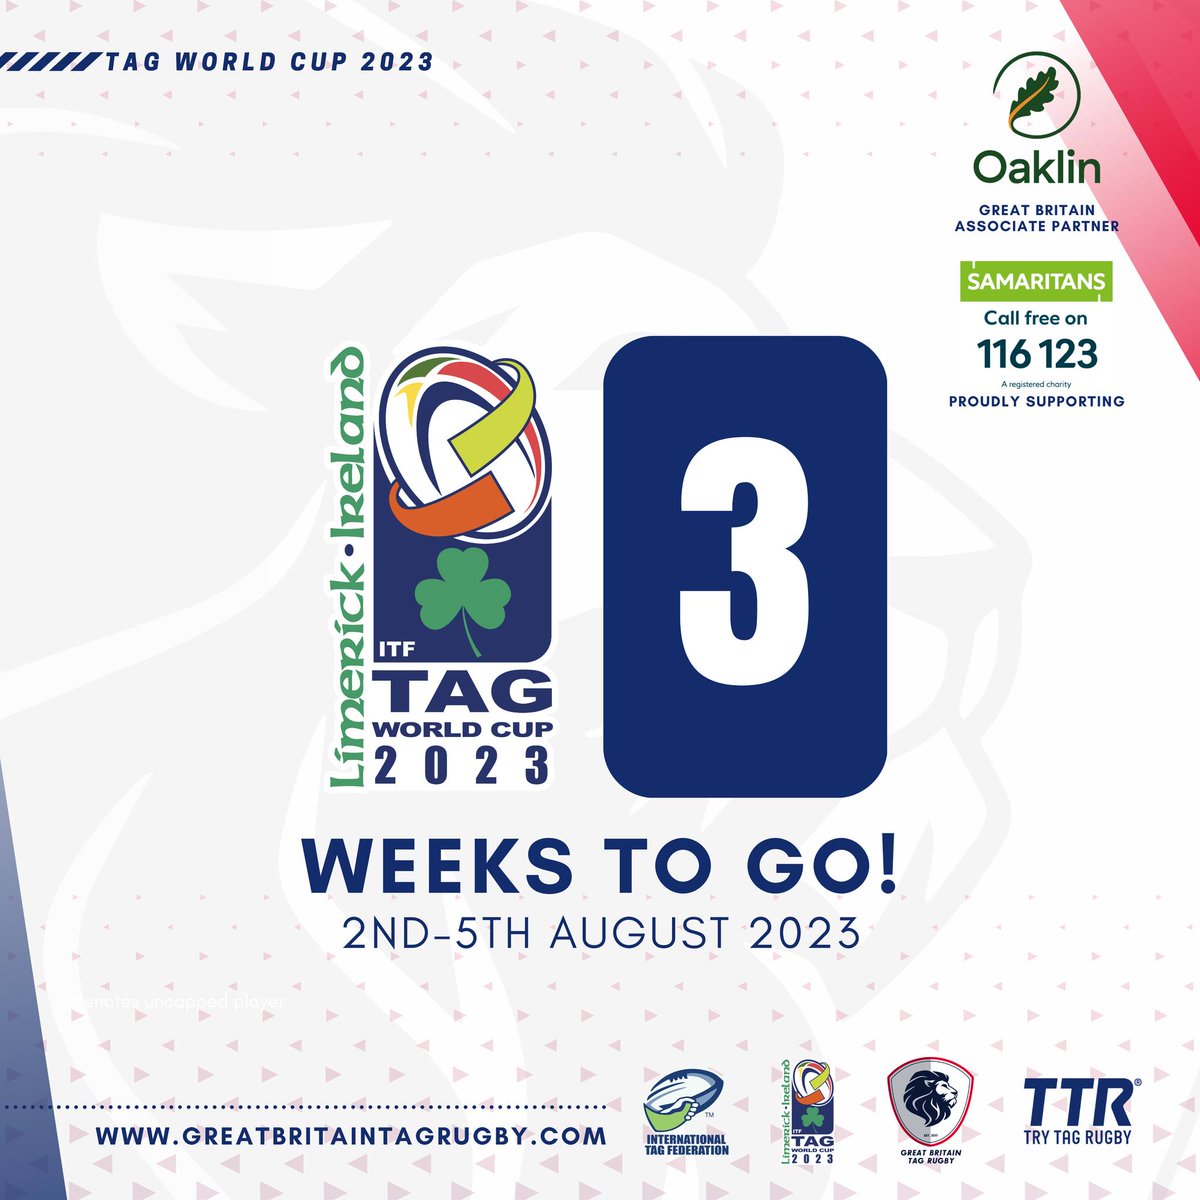 🏆 Just 3 weeks to go until the ITF Tag World Cup in Limerick, Ireland! #TagRugby #TagWorldCup